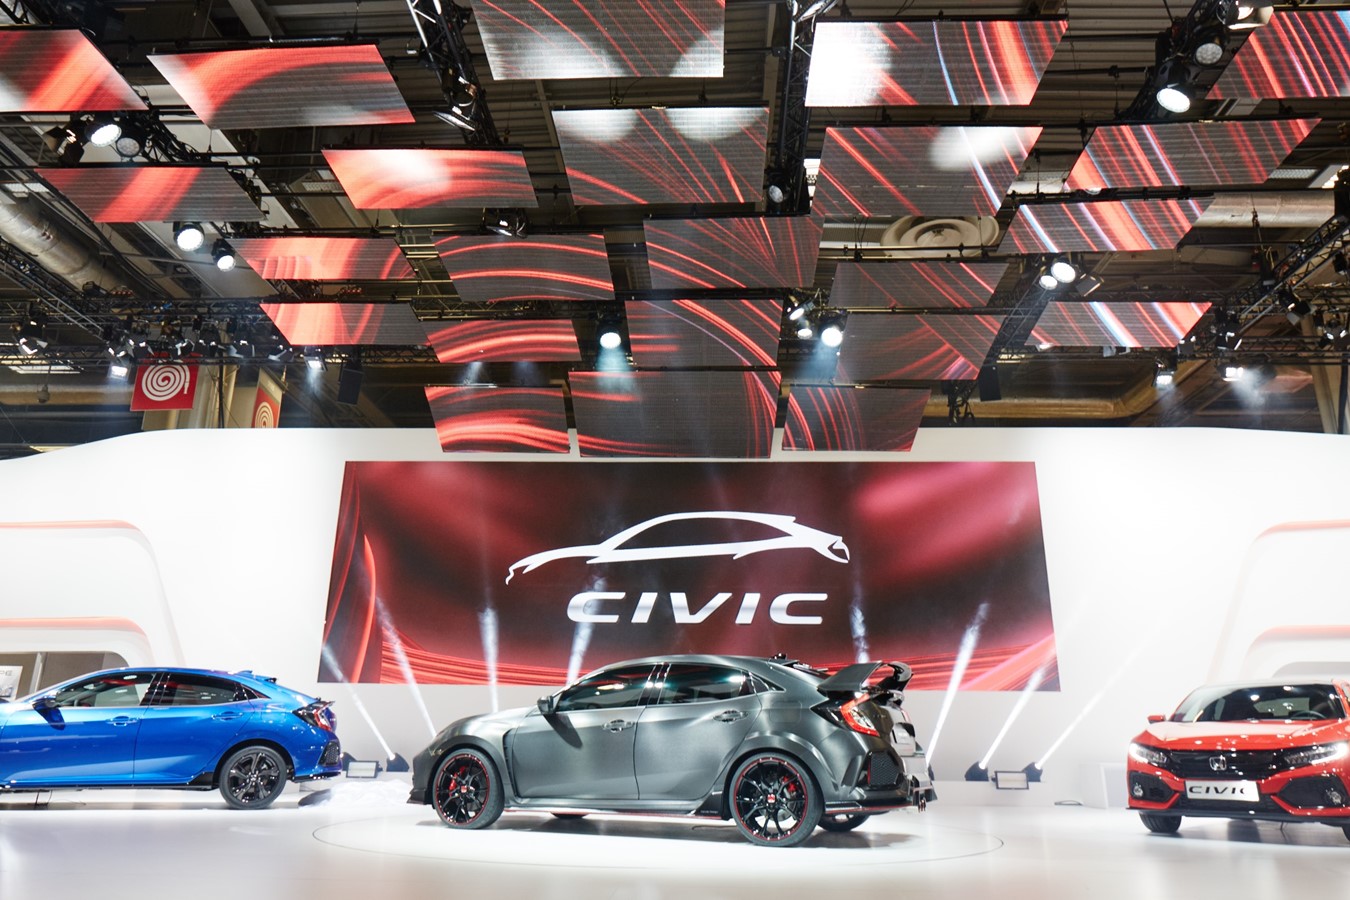 The next step in Honda's resurgence: Civic Hatchback and Type R Prototype take centre stage at Paris